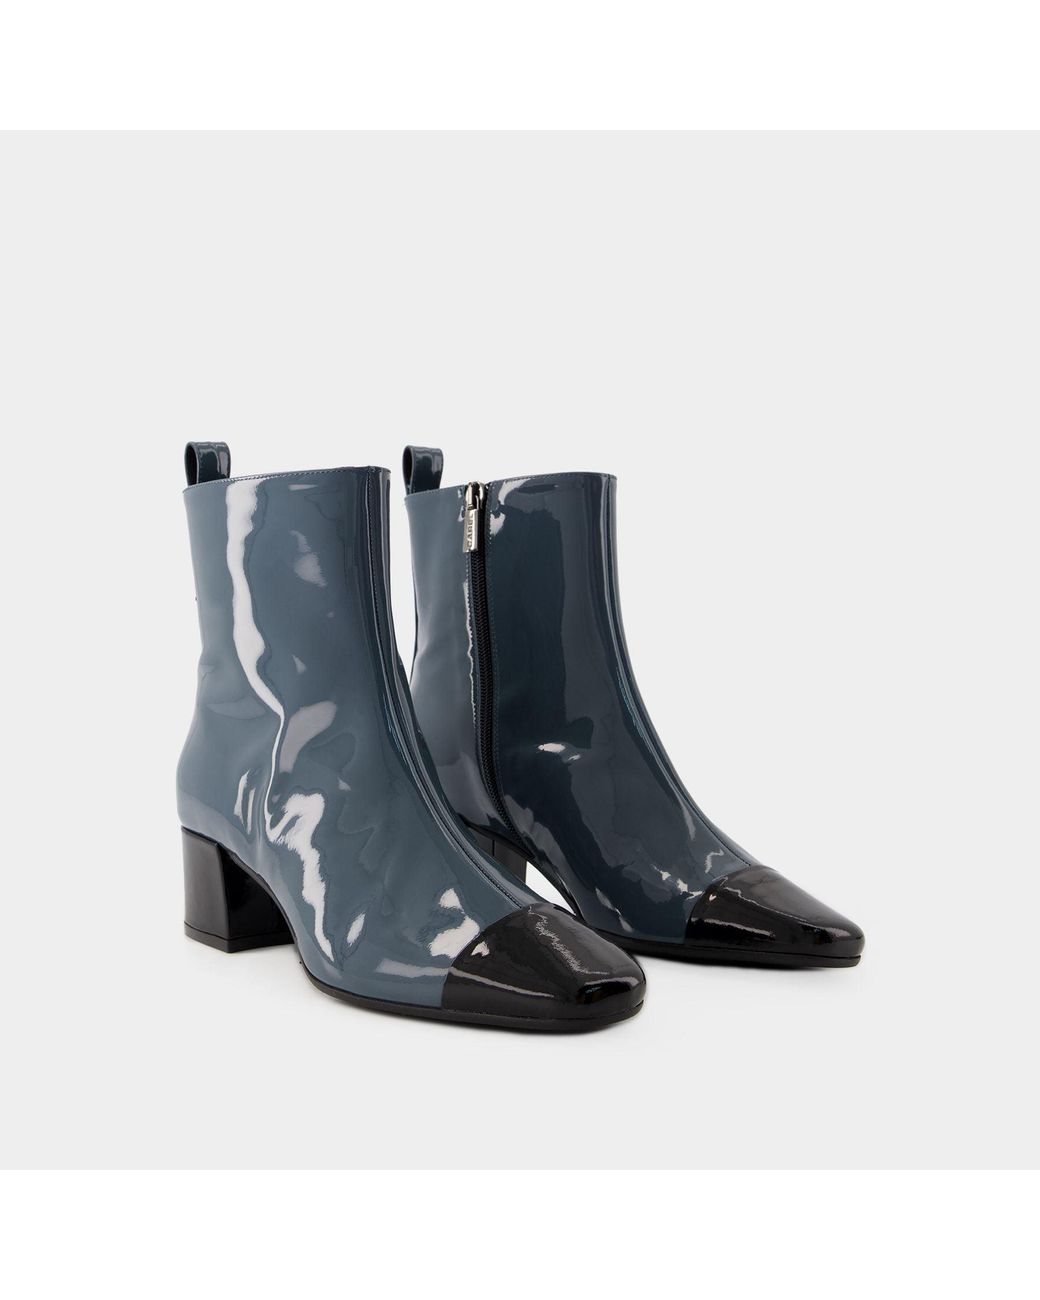 ESTIME Blue, purple and green patent leather boots